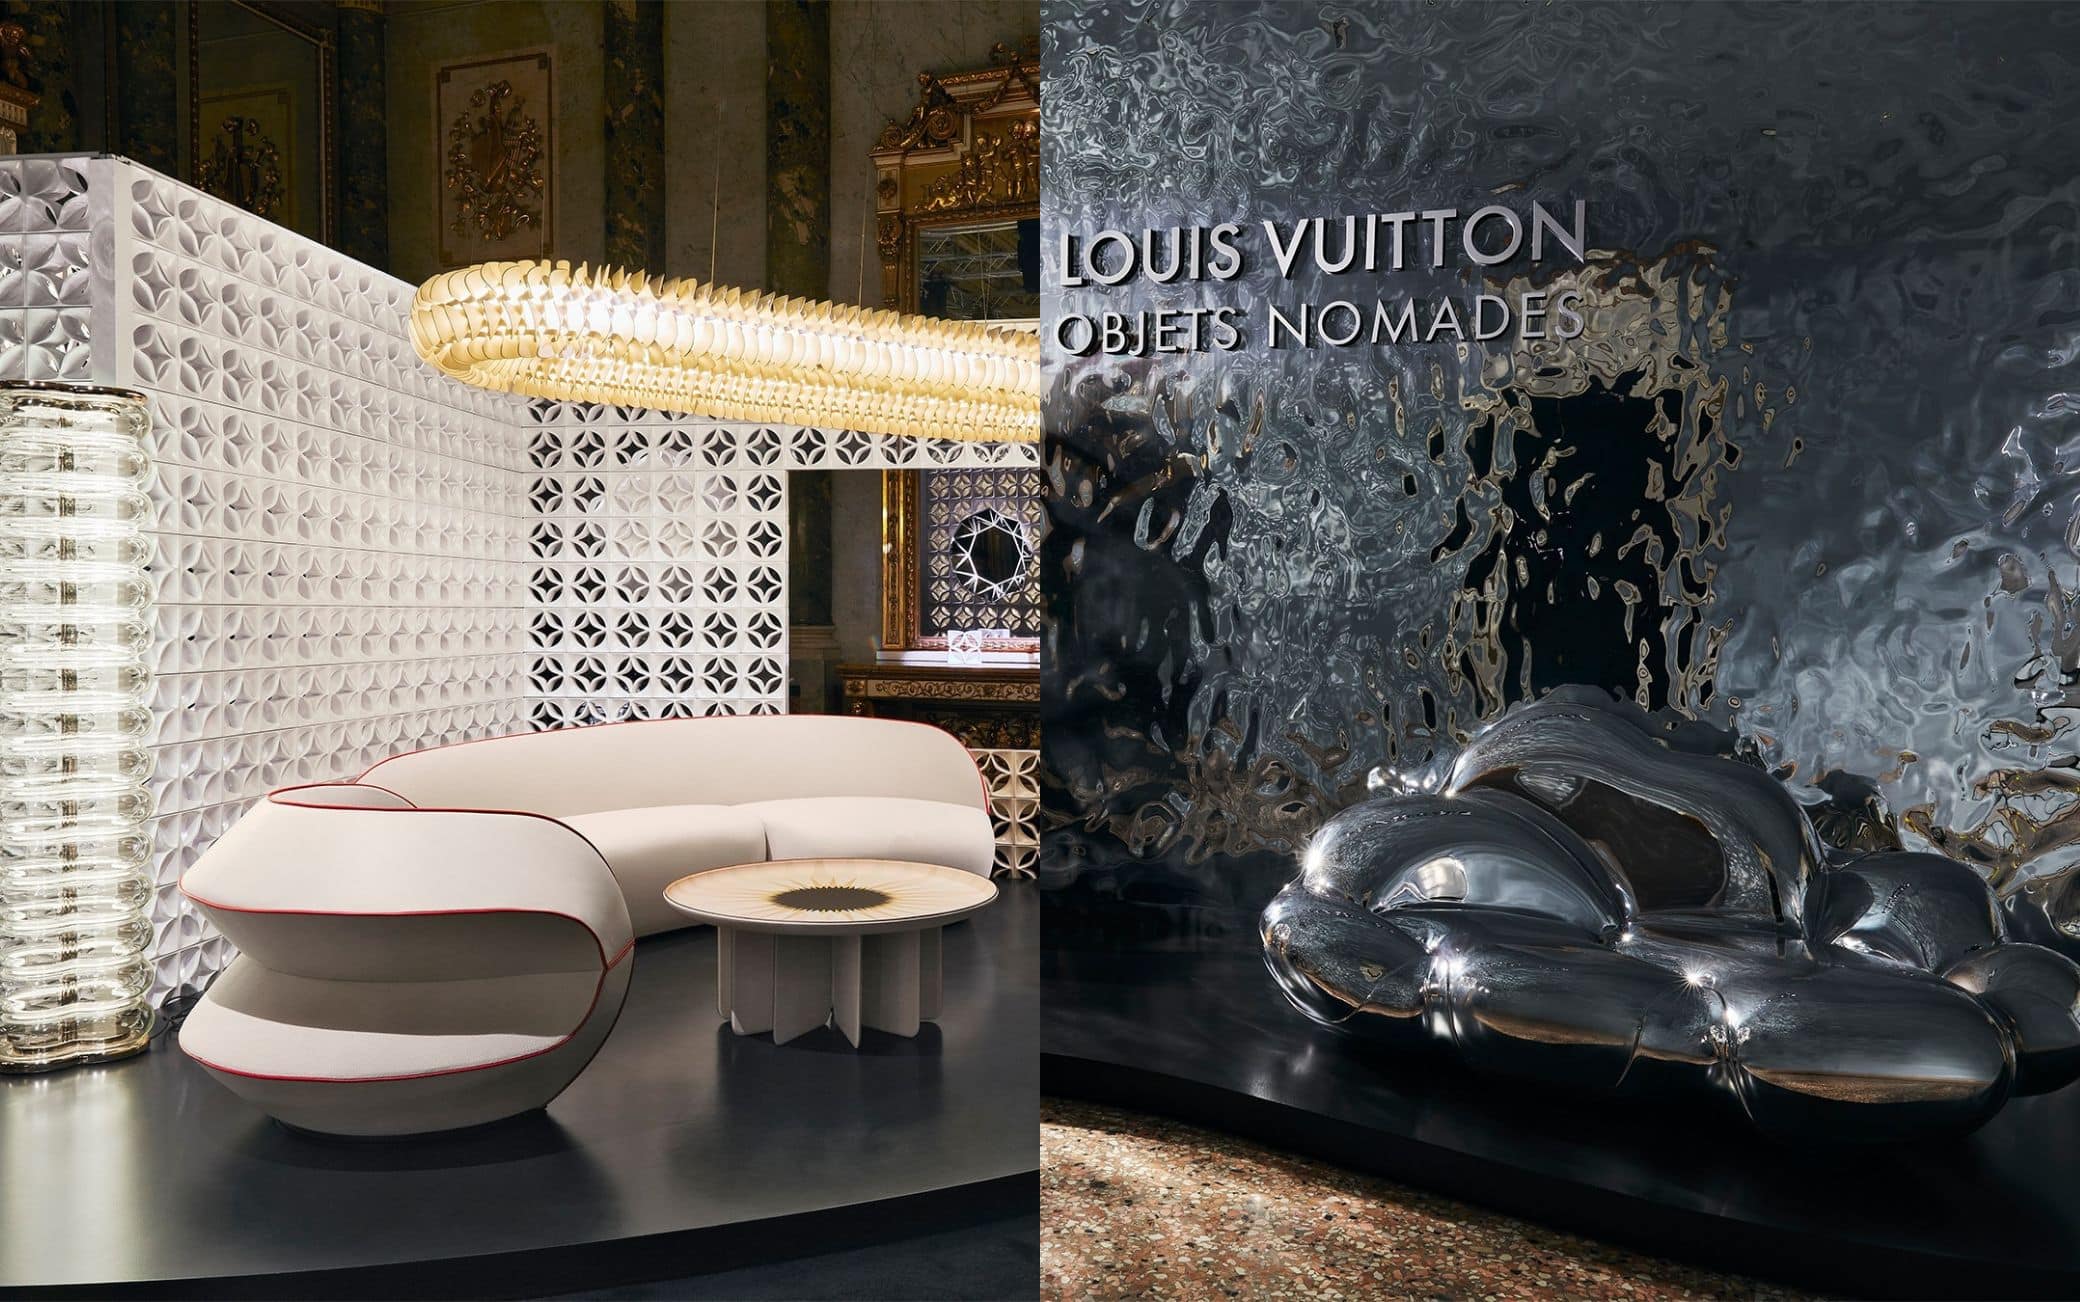 Louis Vuitton: elegance and metropolitan style at FuoriSalone 2022